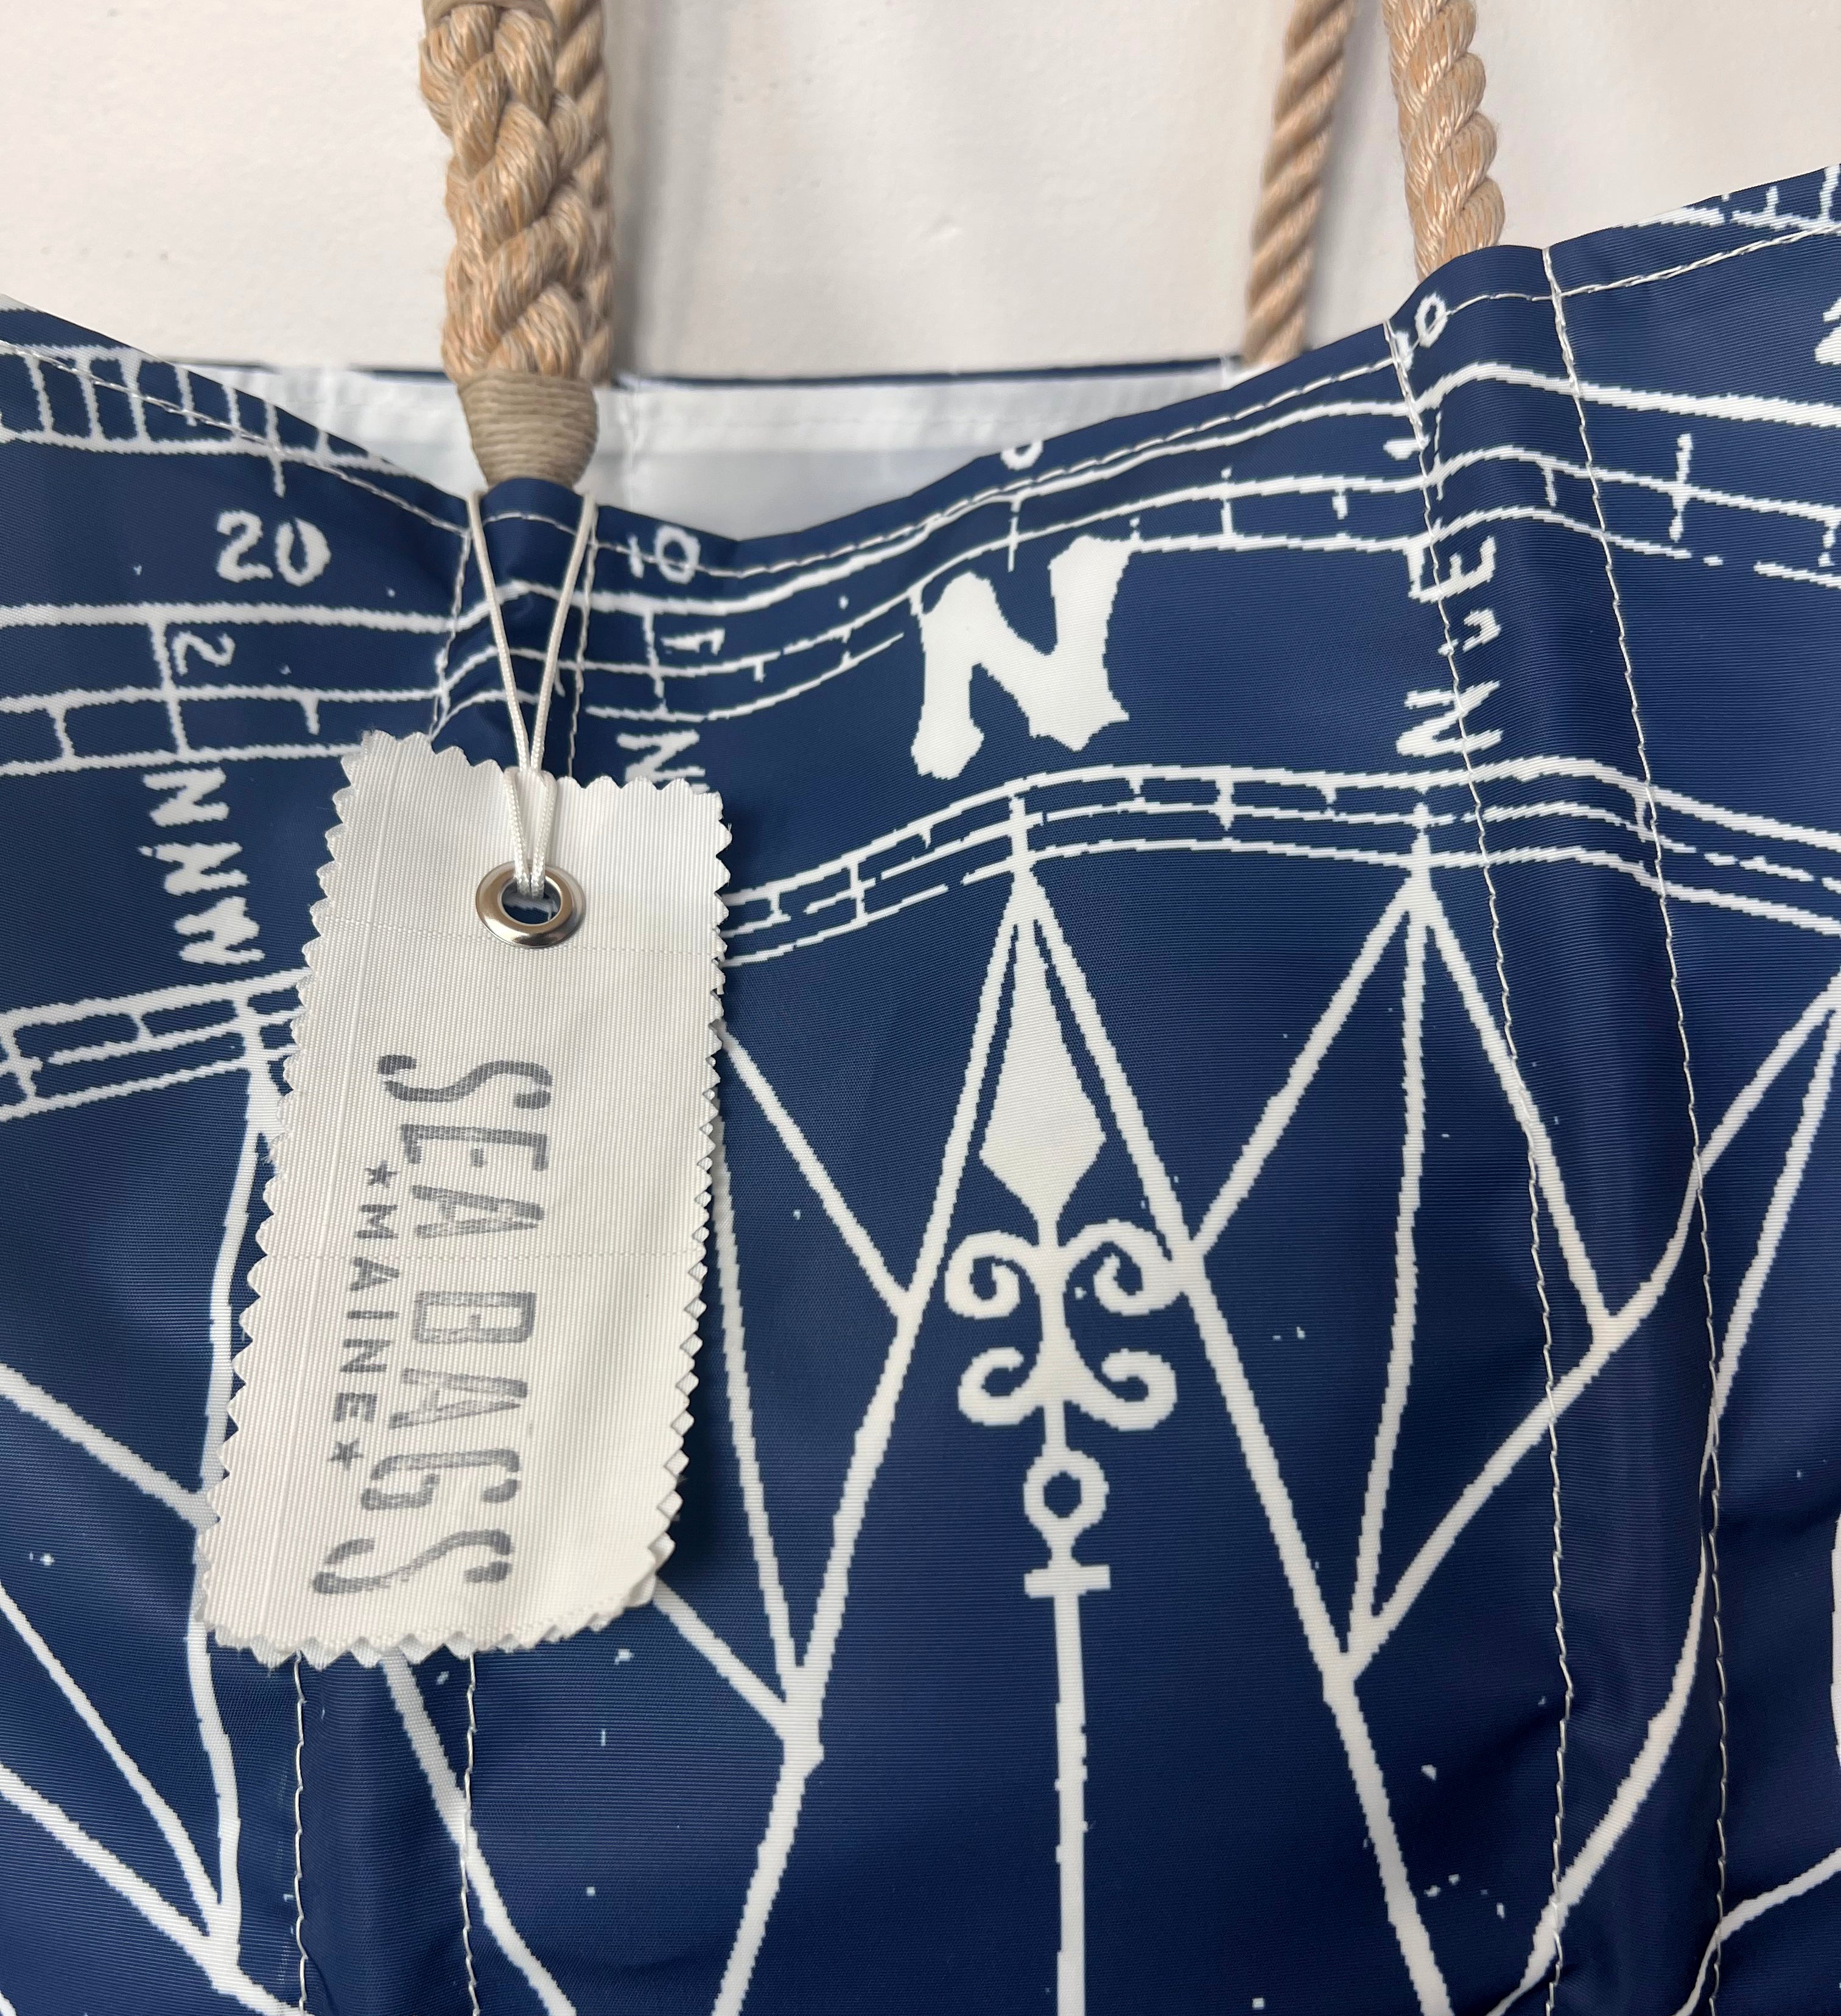 Sea Bags, Large Compass True North Tote